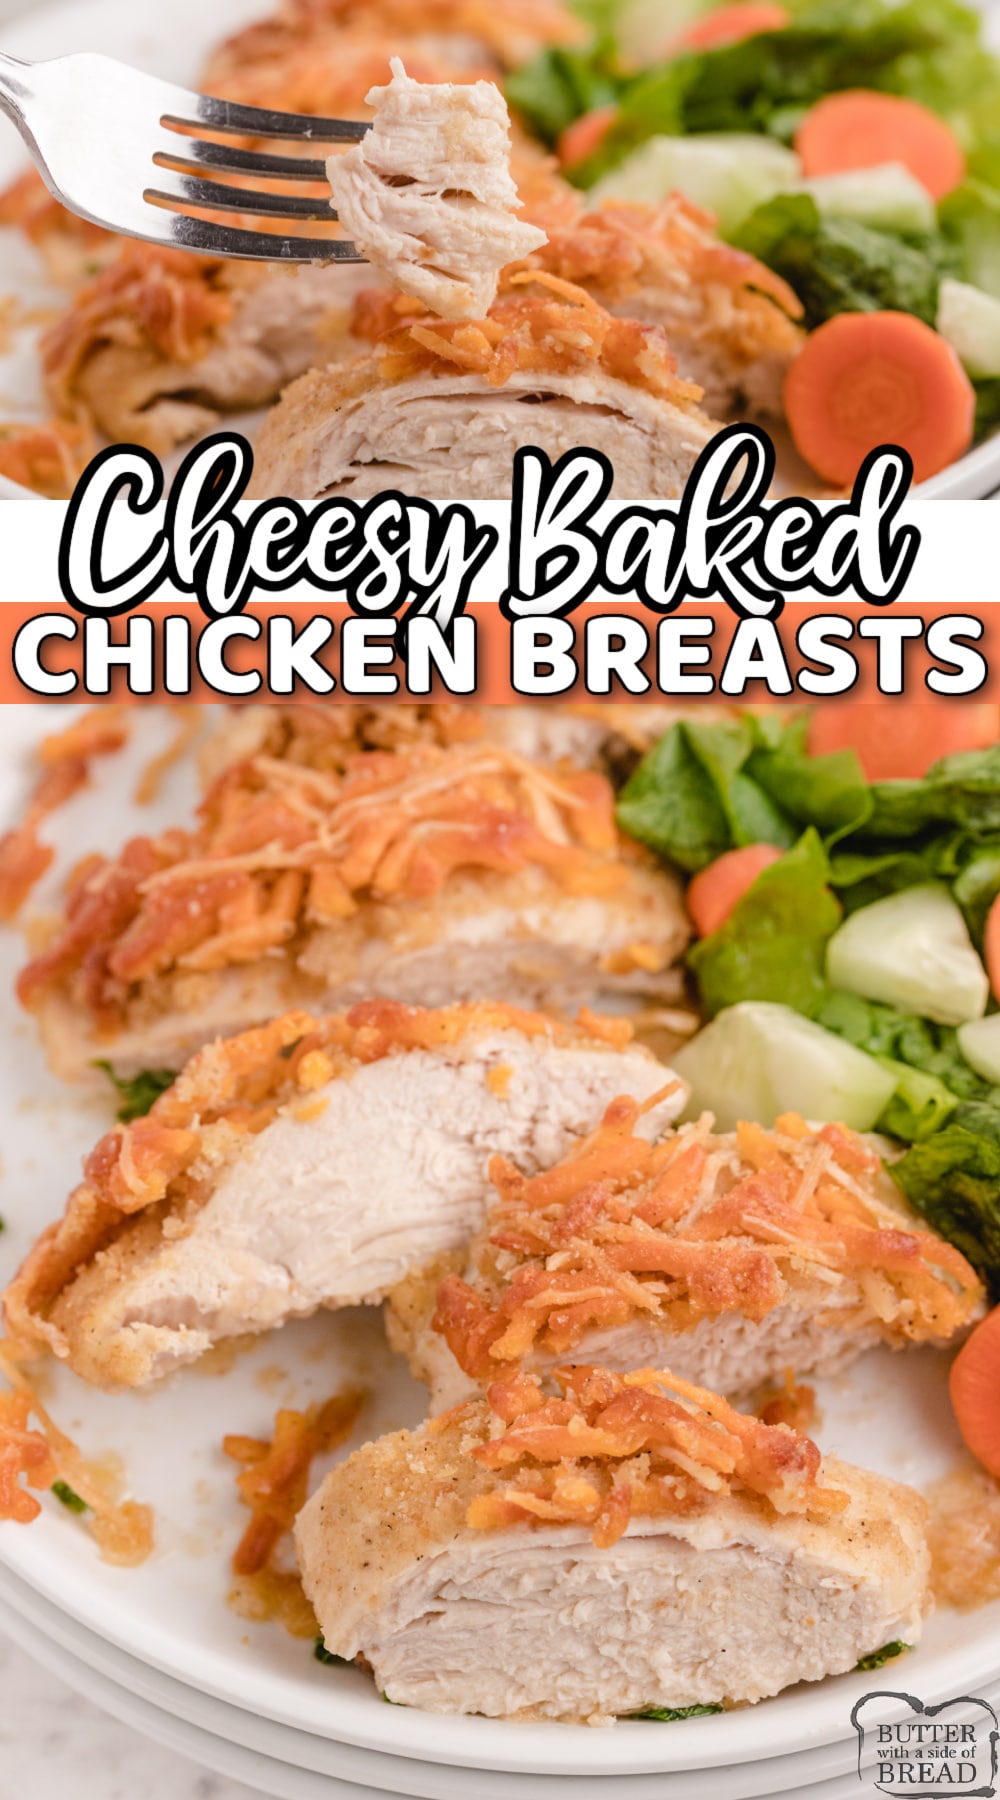 Cheesy Baked Chicken Breasts are coated in cheese, garlic, bread crumbs, parmesan and cheddar cheese. This baked chicken recipe is juicy, full of flavor and so easy to make! 